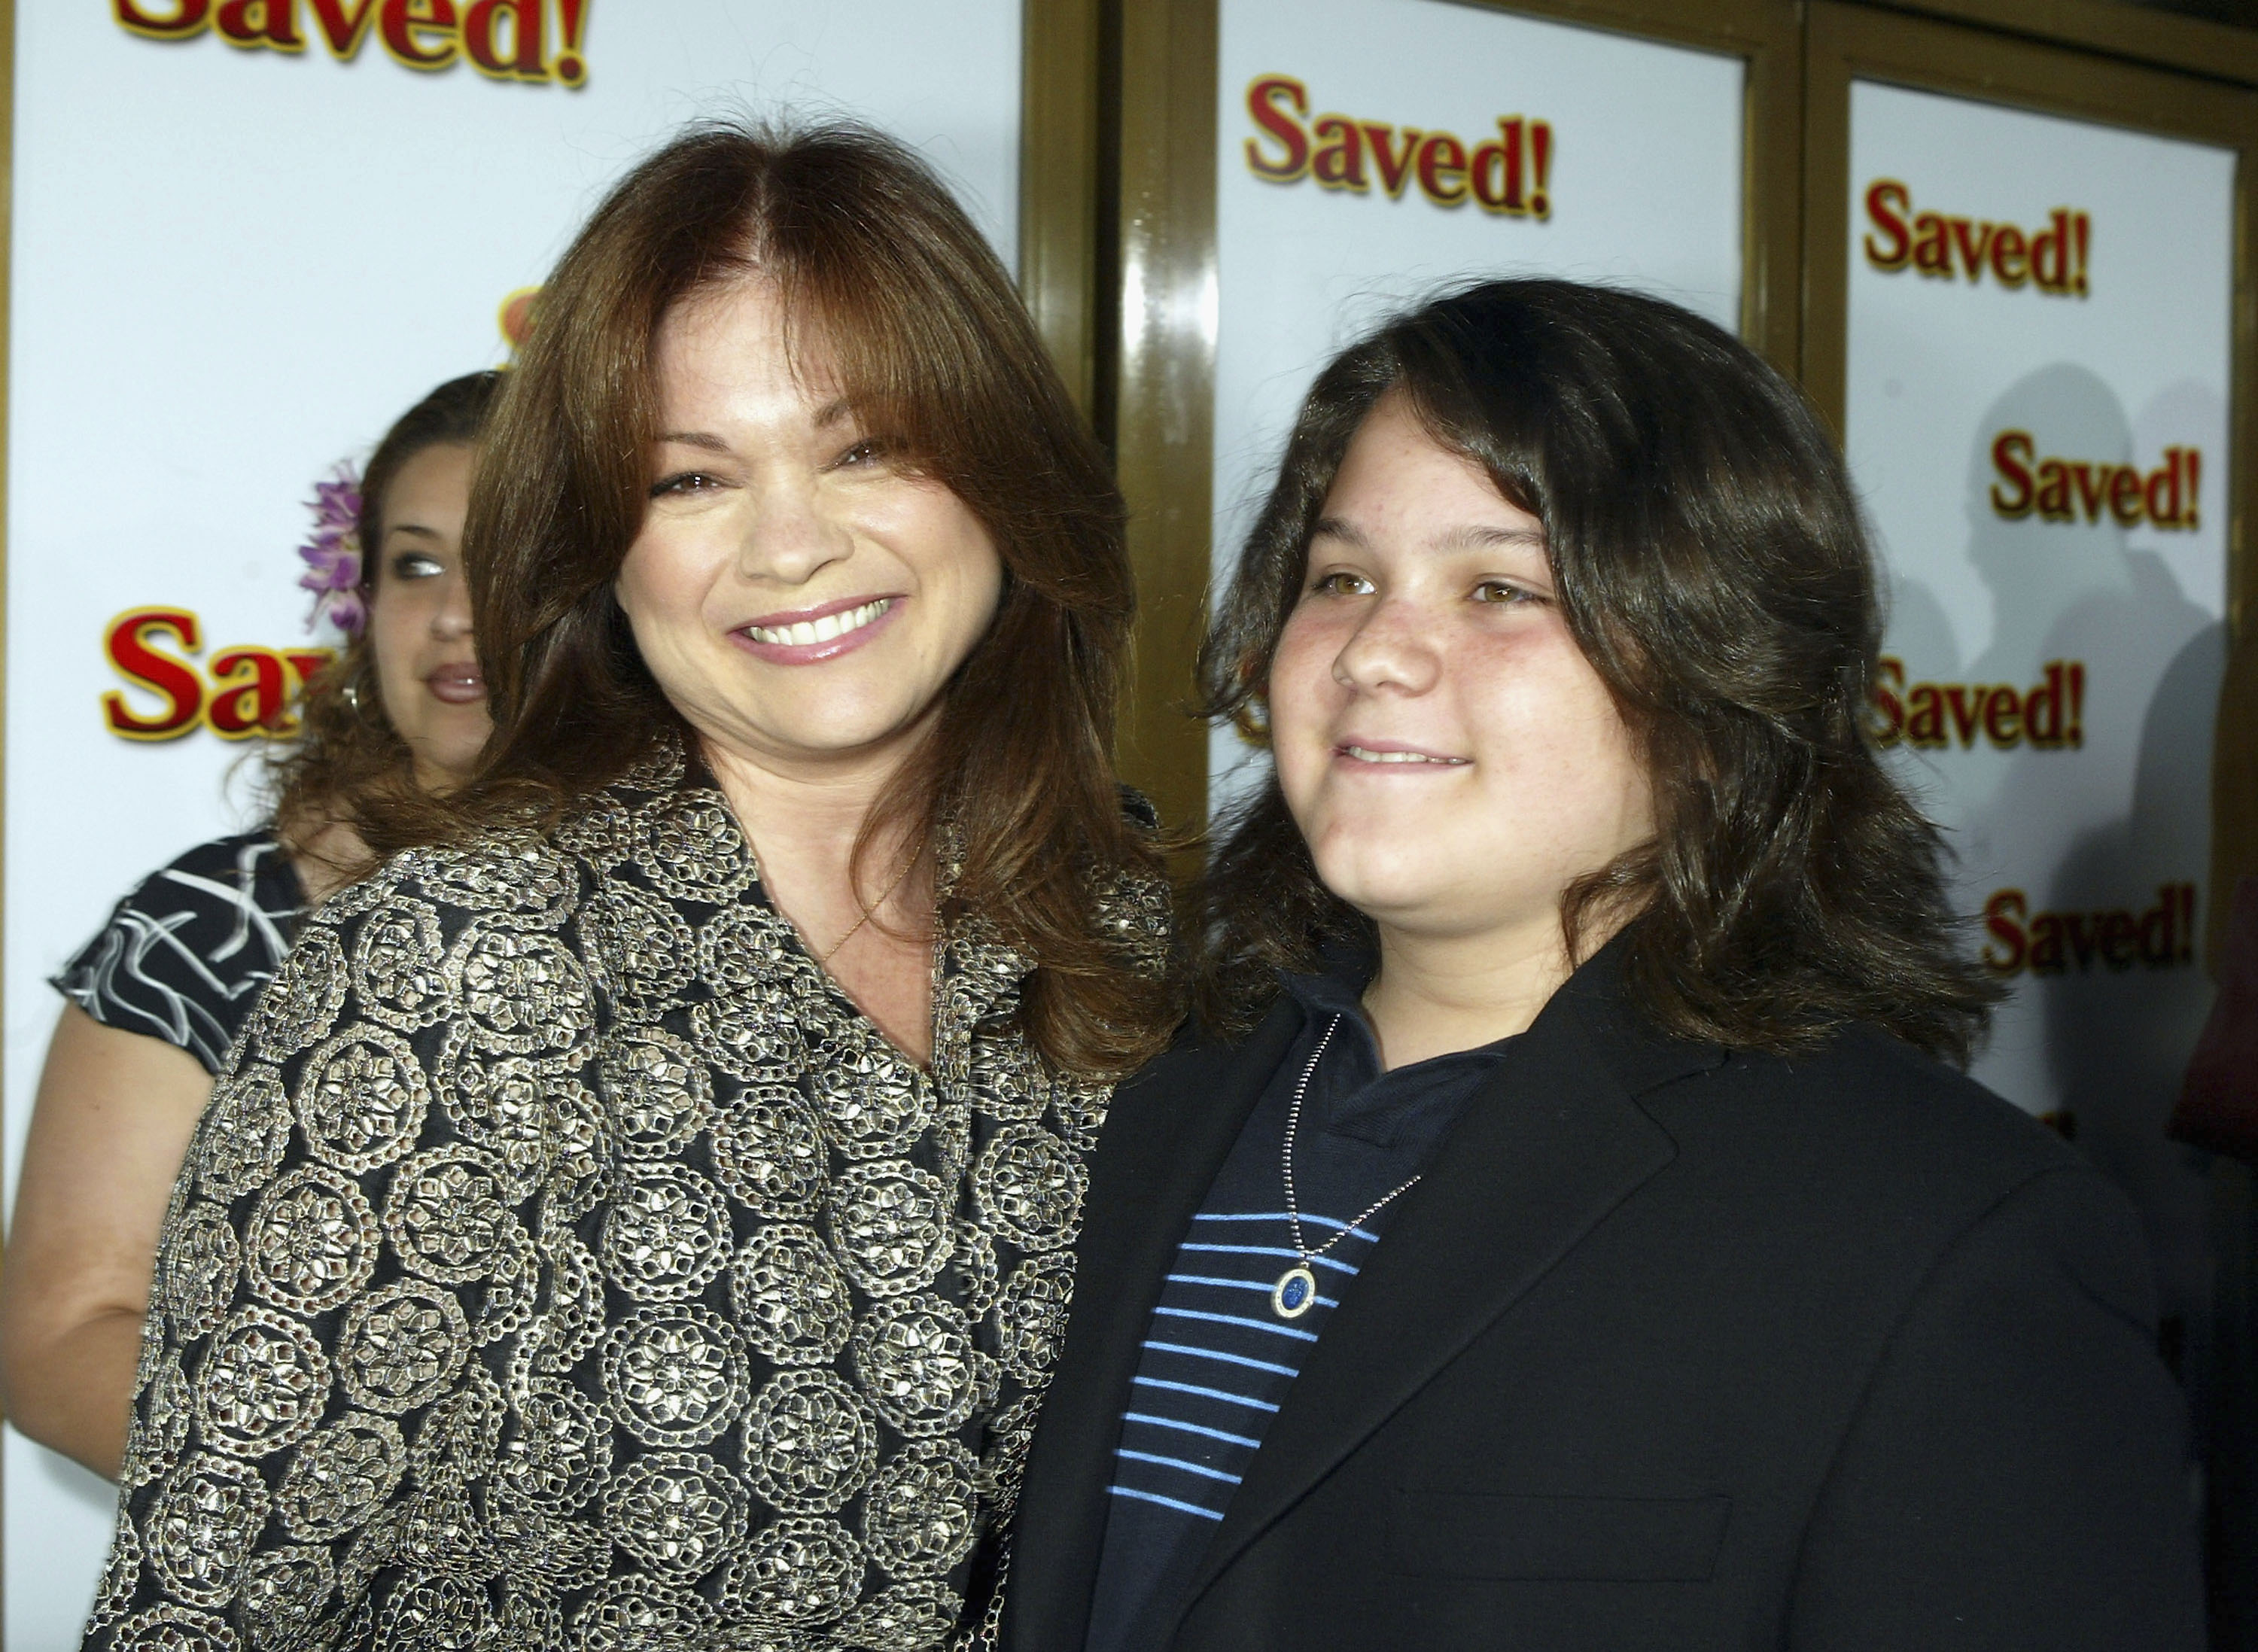 Valerie Bertinelli and her son Wolfgang Van Halen in Los Angeles in 2004 | Source: Getty Images